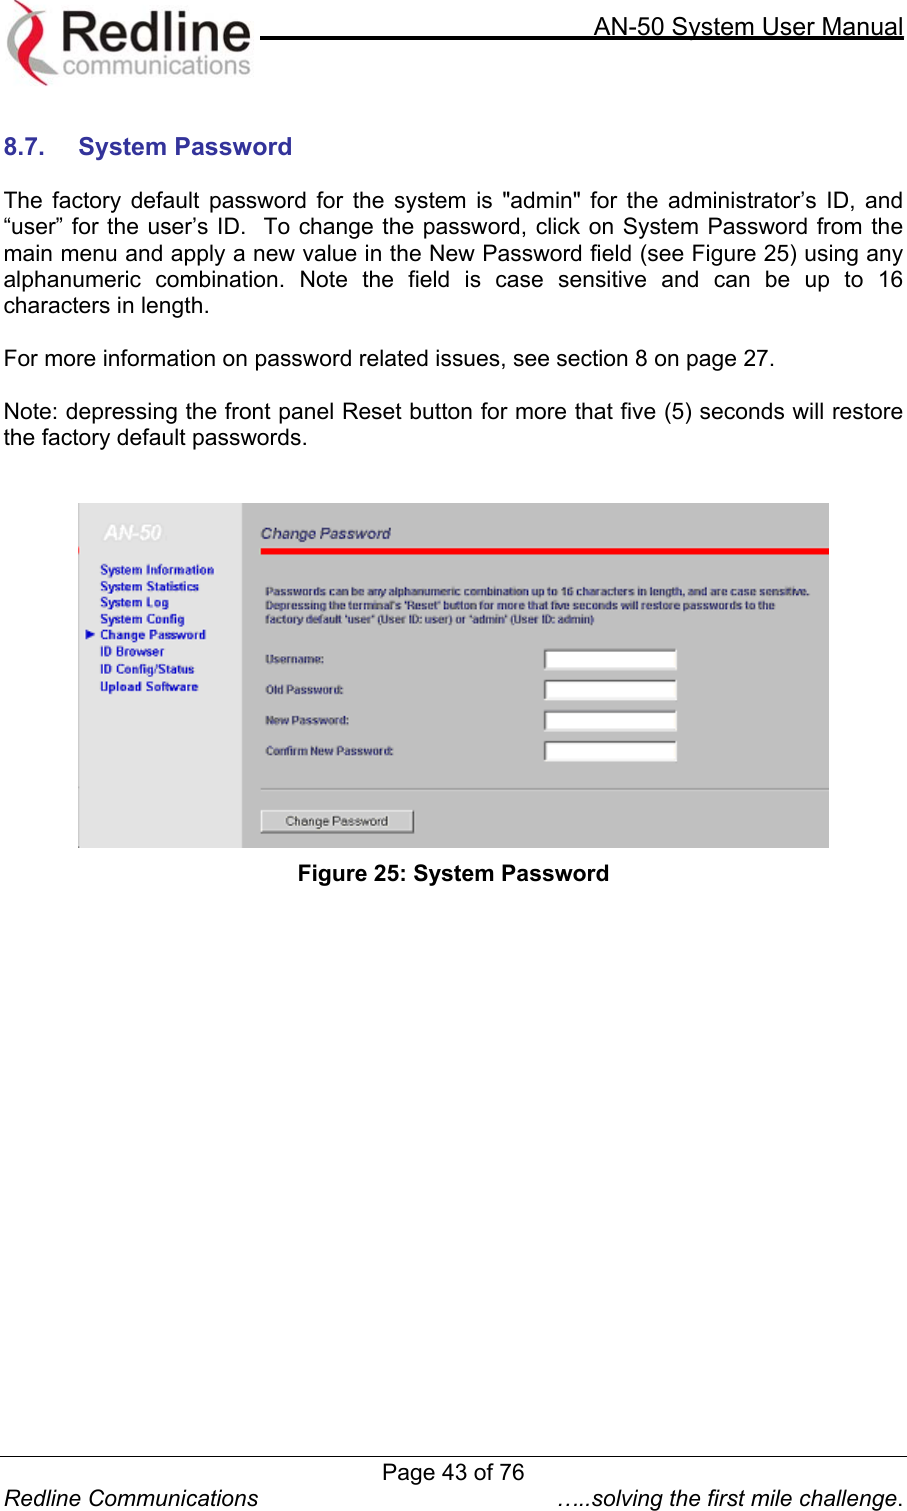     AN-50 System User Manual  Redline Communications  …..solving the first mile challenge.  8.7. System Password  The factory default password for the system is &quot;admin&quot; for the administrator’s ID, and “user” for the user’s ID.  To change the password, click on System Password from the main menu and apply a new value in the New Password field (see Figure 25) using any alphanumeric combination. Note the field is case sensitive and can be up to 16 characters in length.   For more information on password related issues, see section 8 on page 27.  Note: depressing the front panel Reset button for more that five (5) seconds will restore the factory default passwords.     Figure 25: System Password  Page 43 of 76